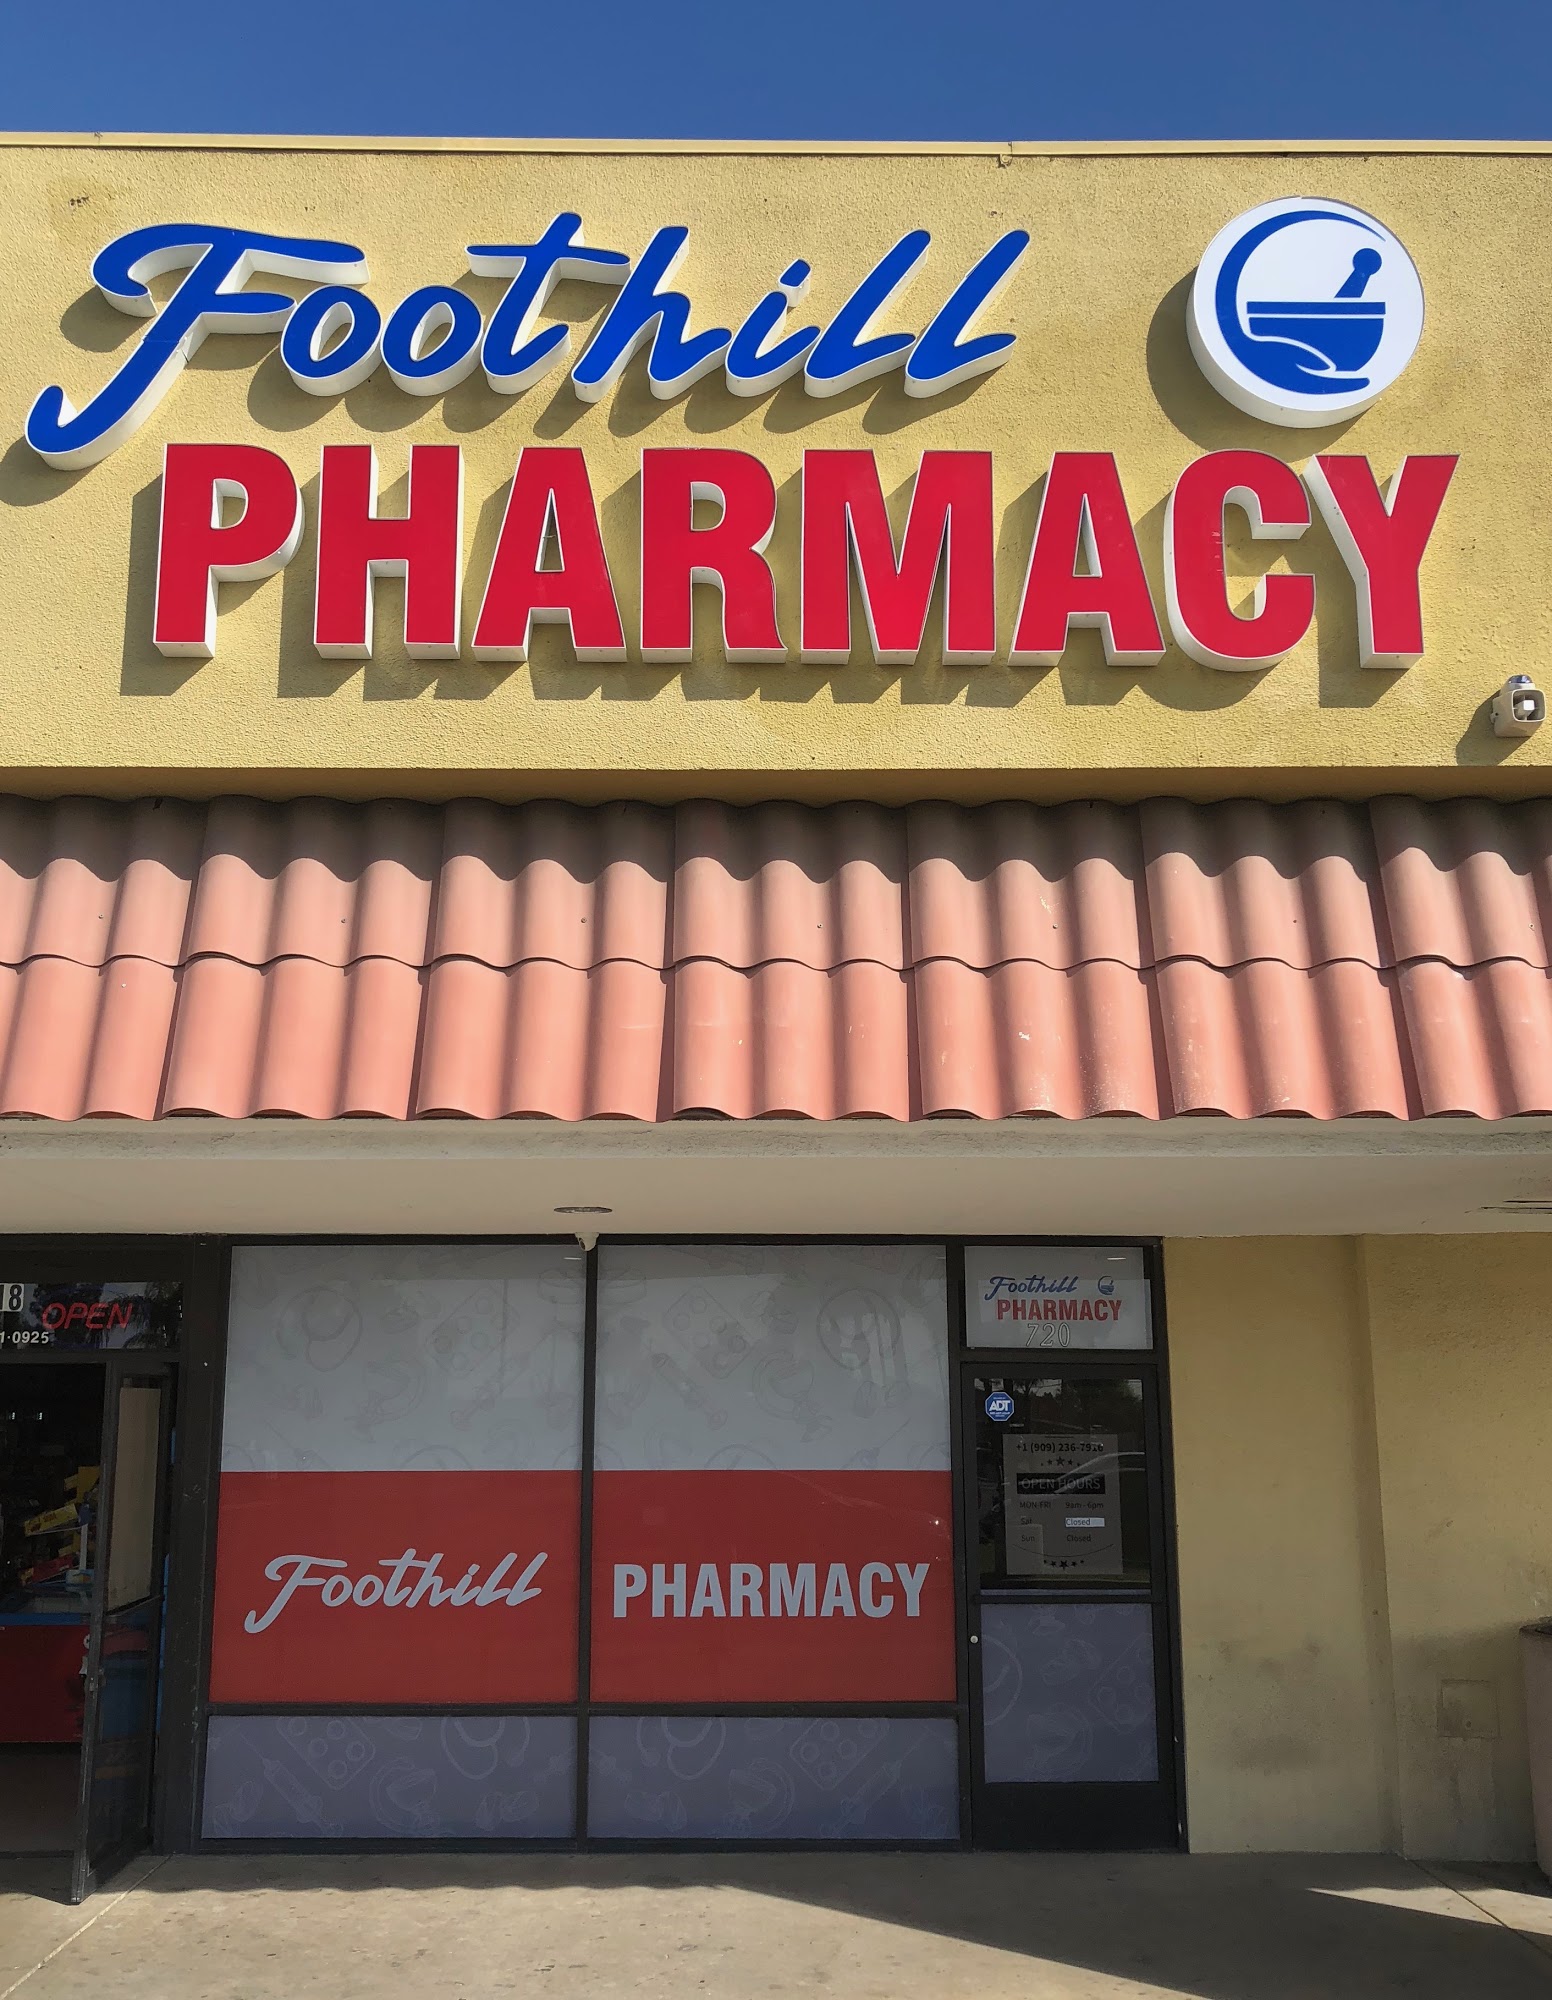 Foothill Pharmacy